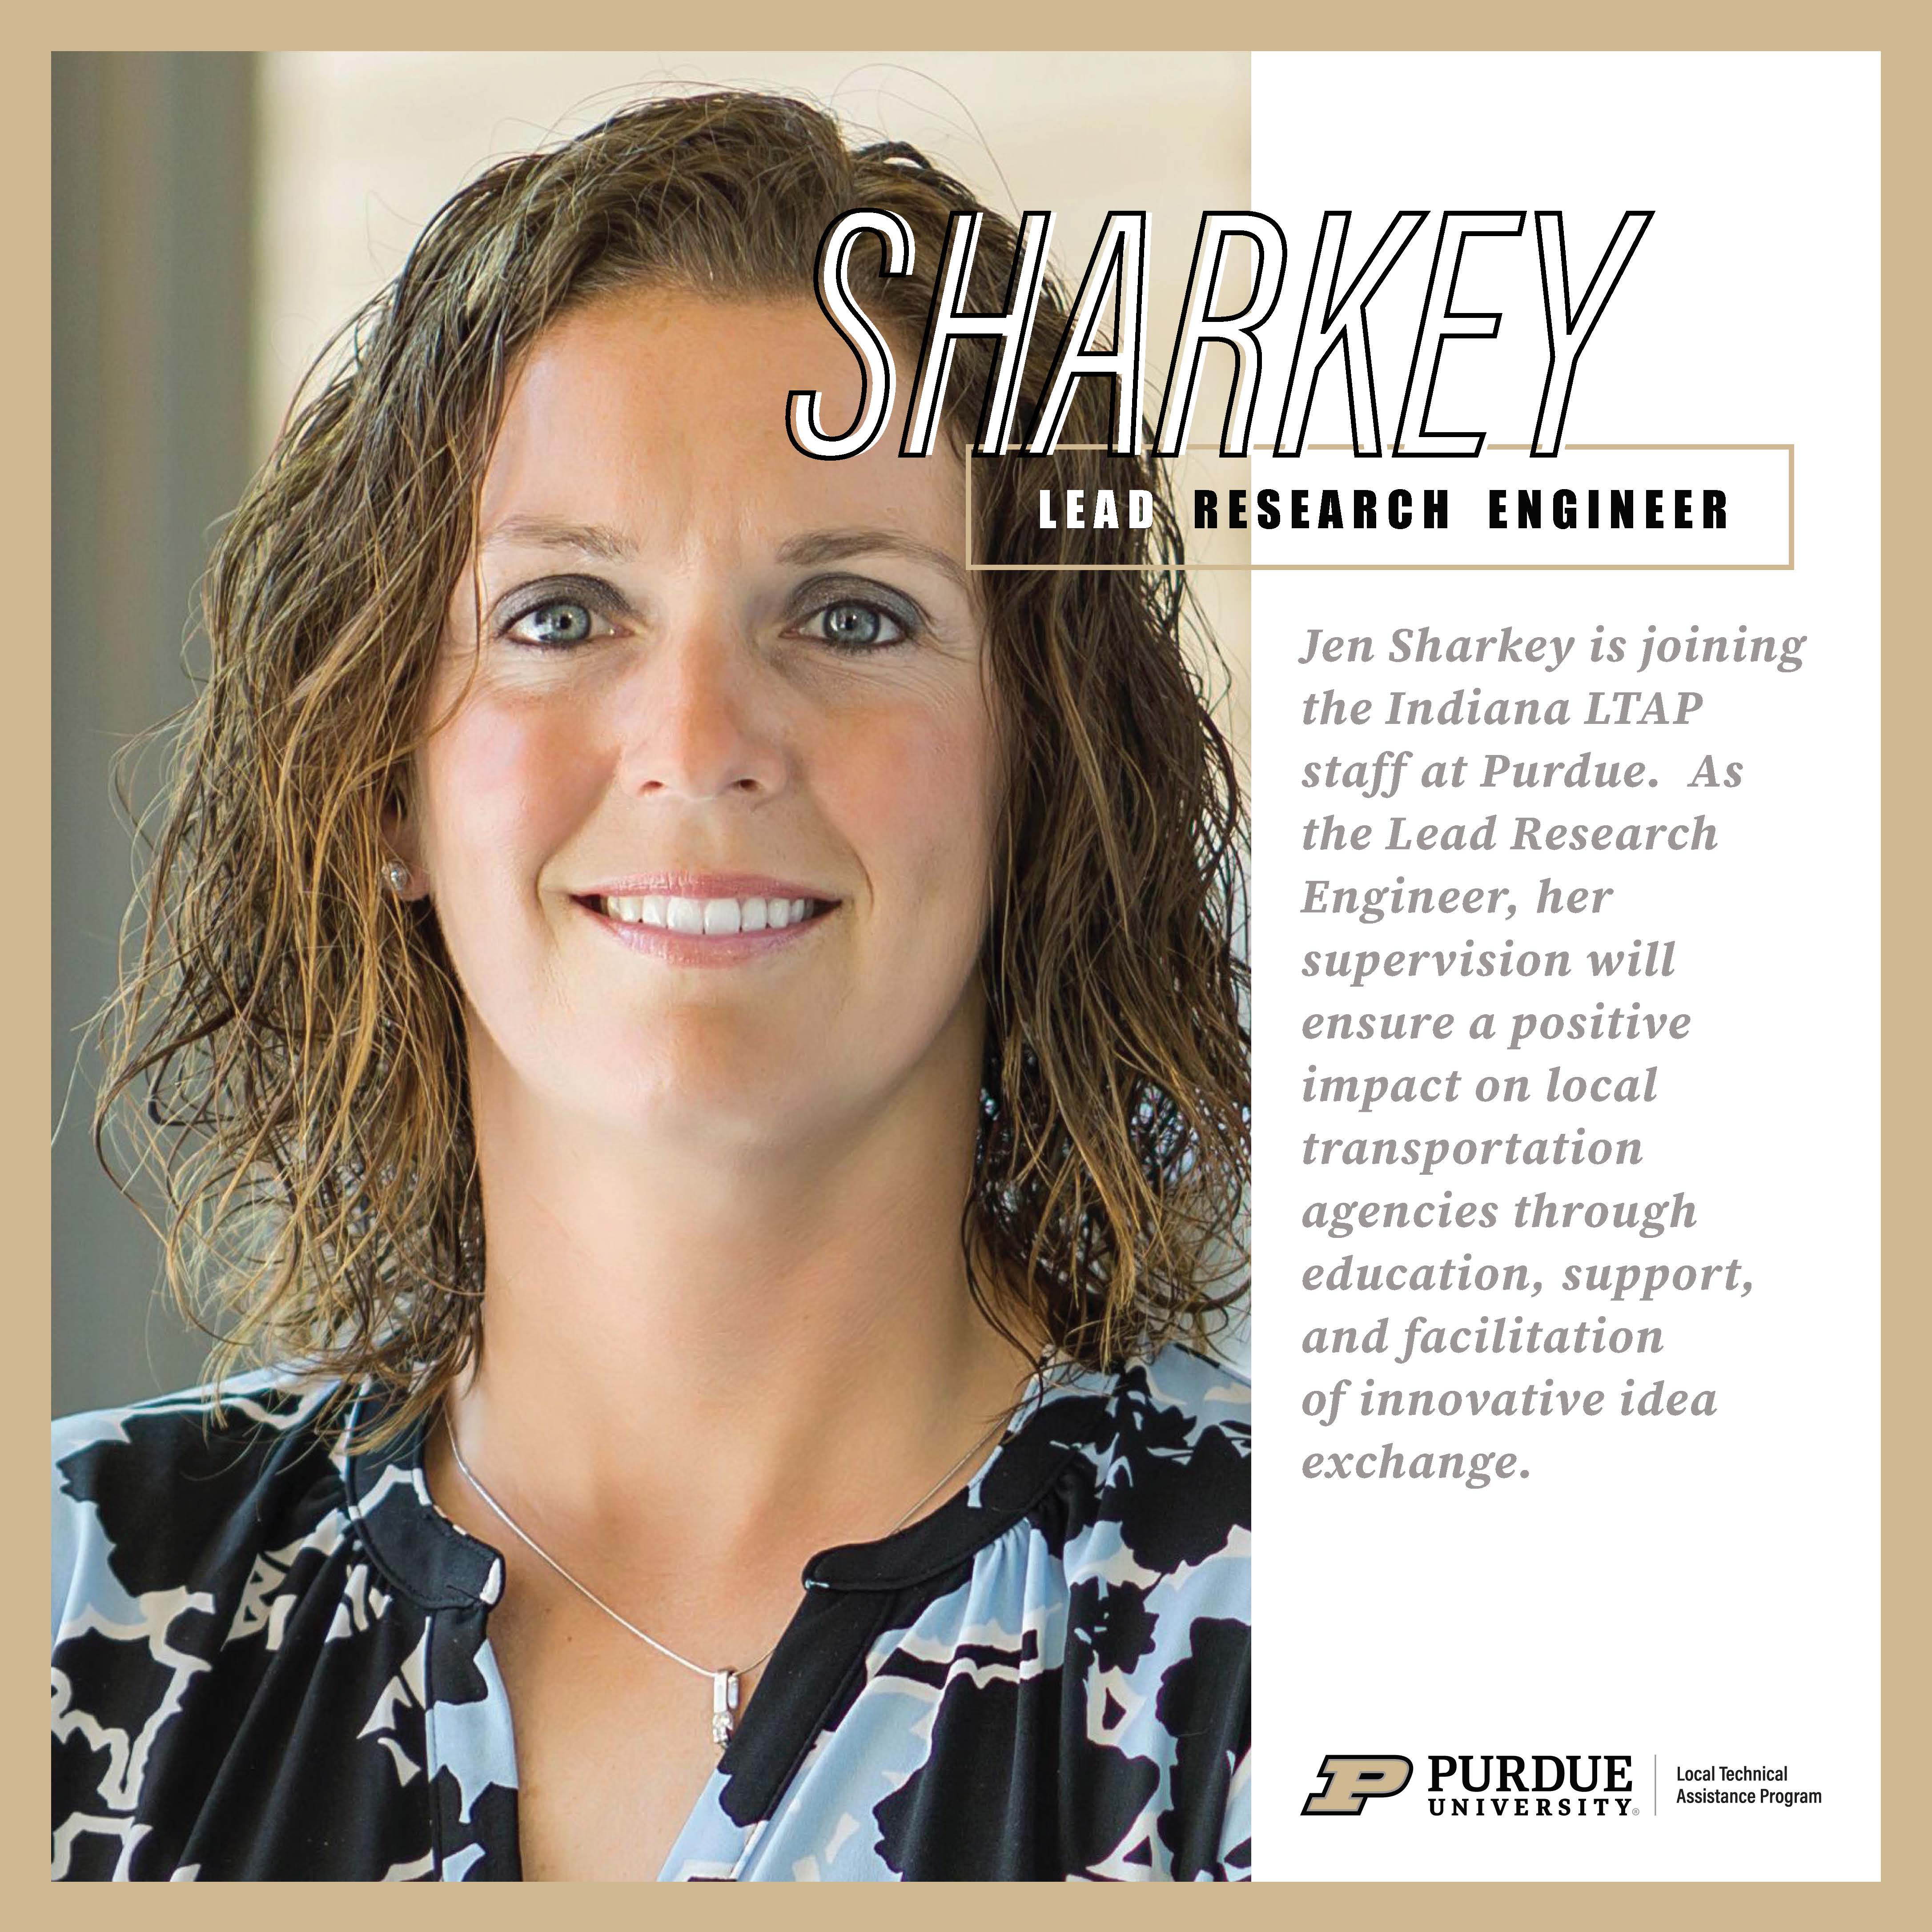 Photo of Jen Sharkey with text that reads: Jen Sharkey is joining the Indiana LTAP staff at Purdue. As the Lead Research Engineer, her supervision will ensure a positive impact on local transportation agencies through education, support, and facilitation of innovative idea exchange.